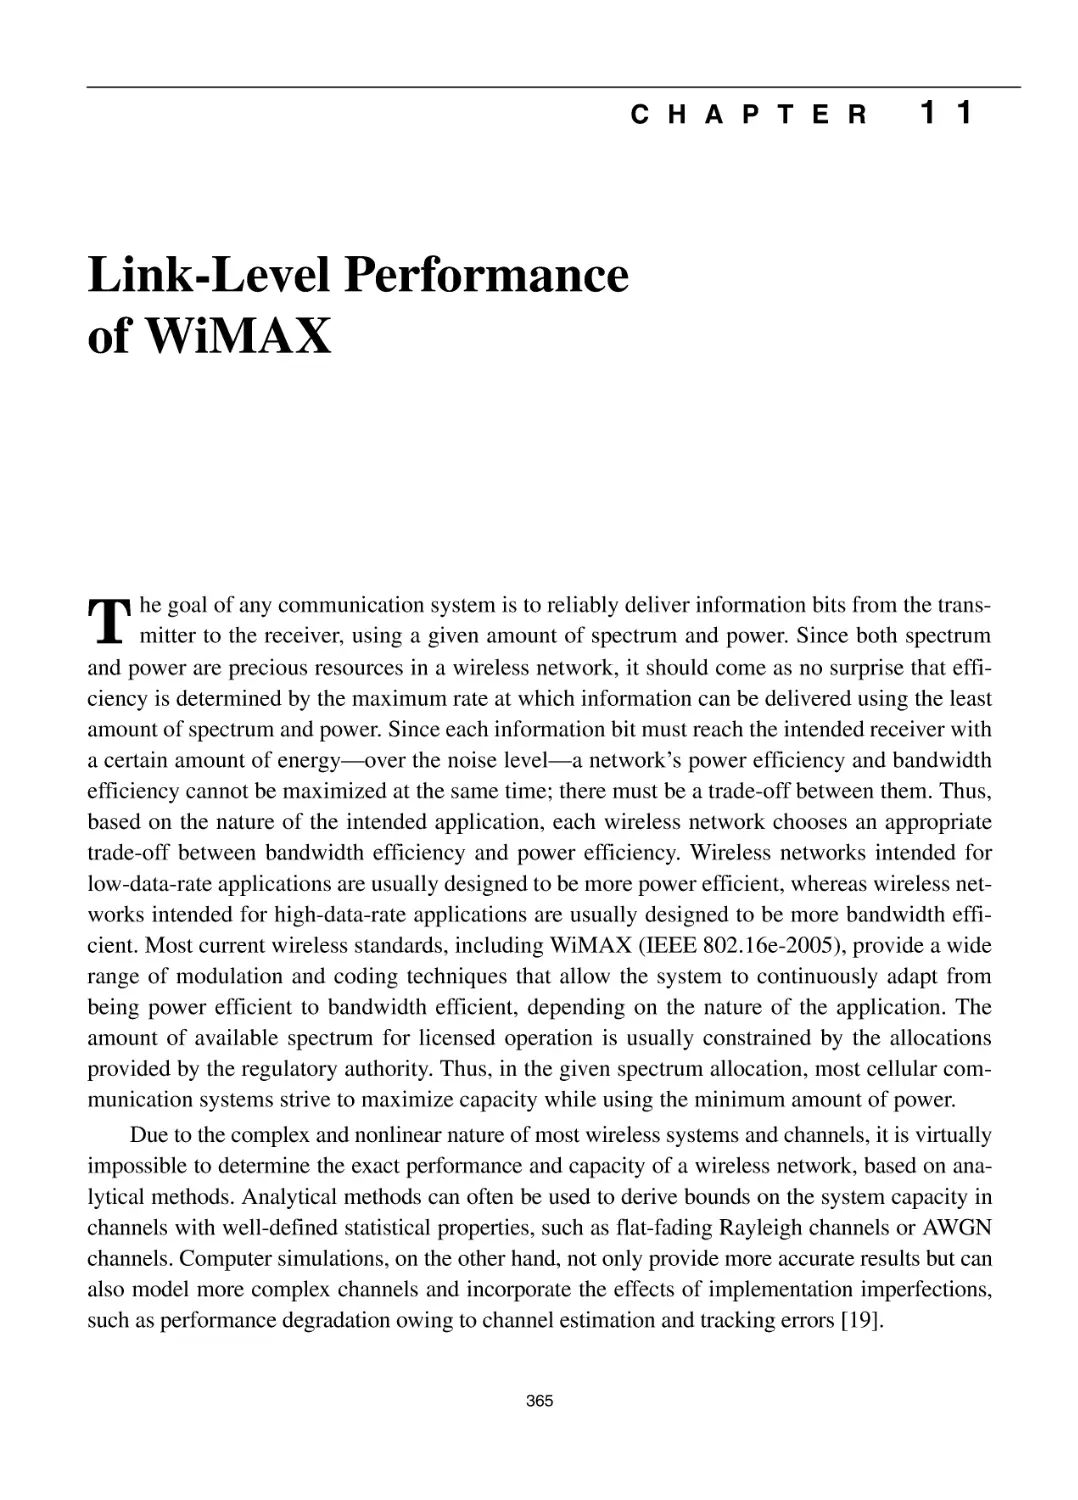 11 Link-Level Performance of WiMAX